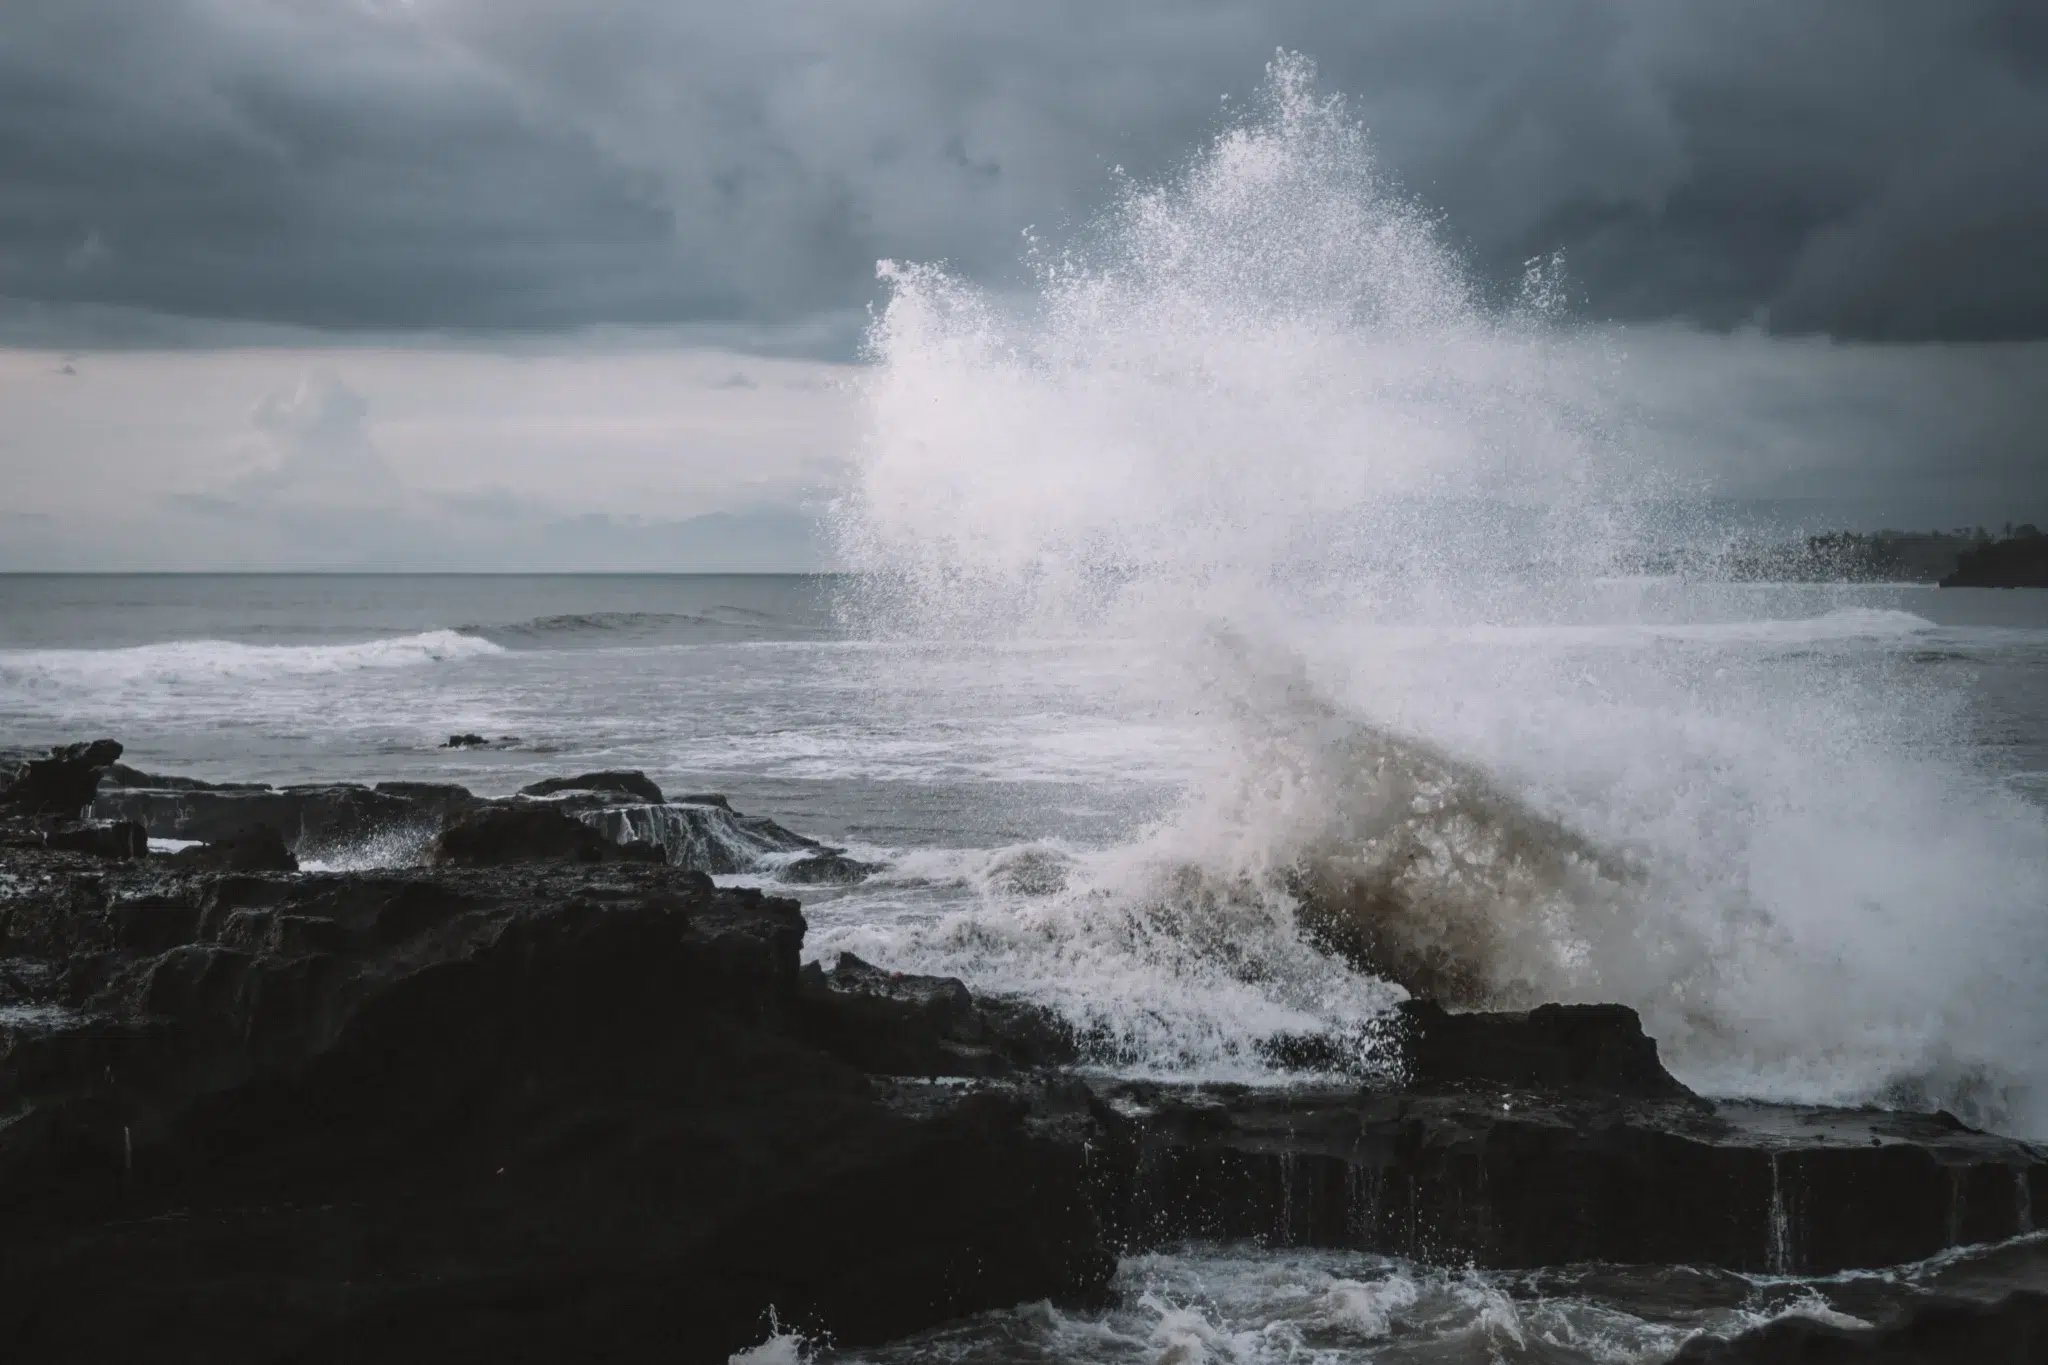 Volatile markets represented by waves crashing